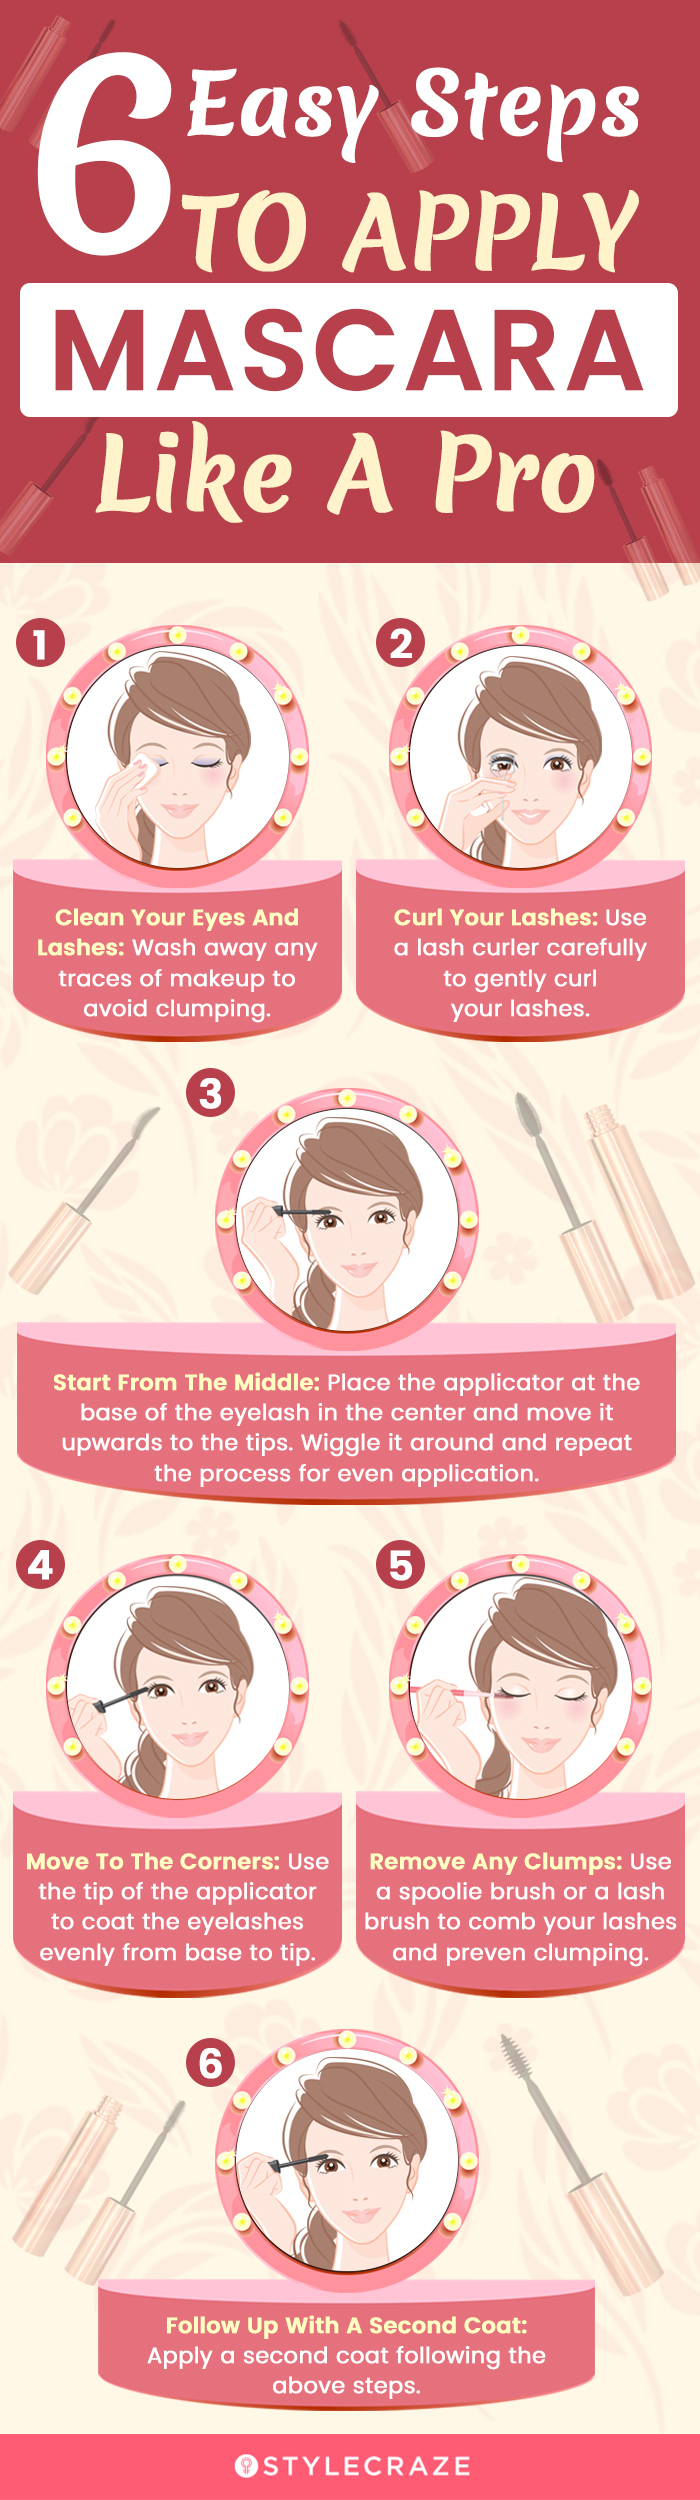 6 easy steps to apply mascara like a pro (infographic)